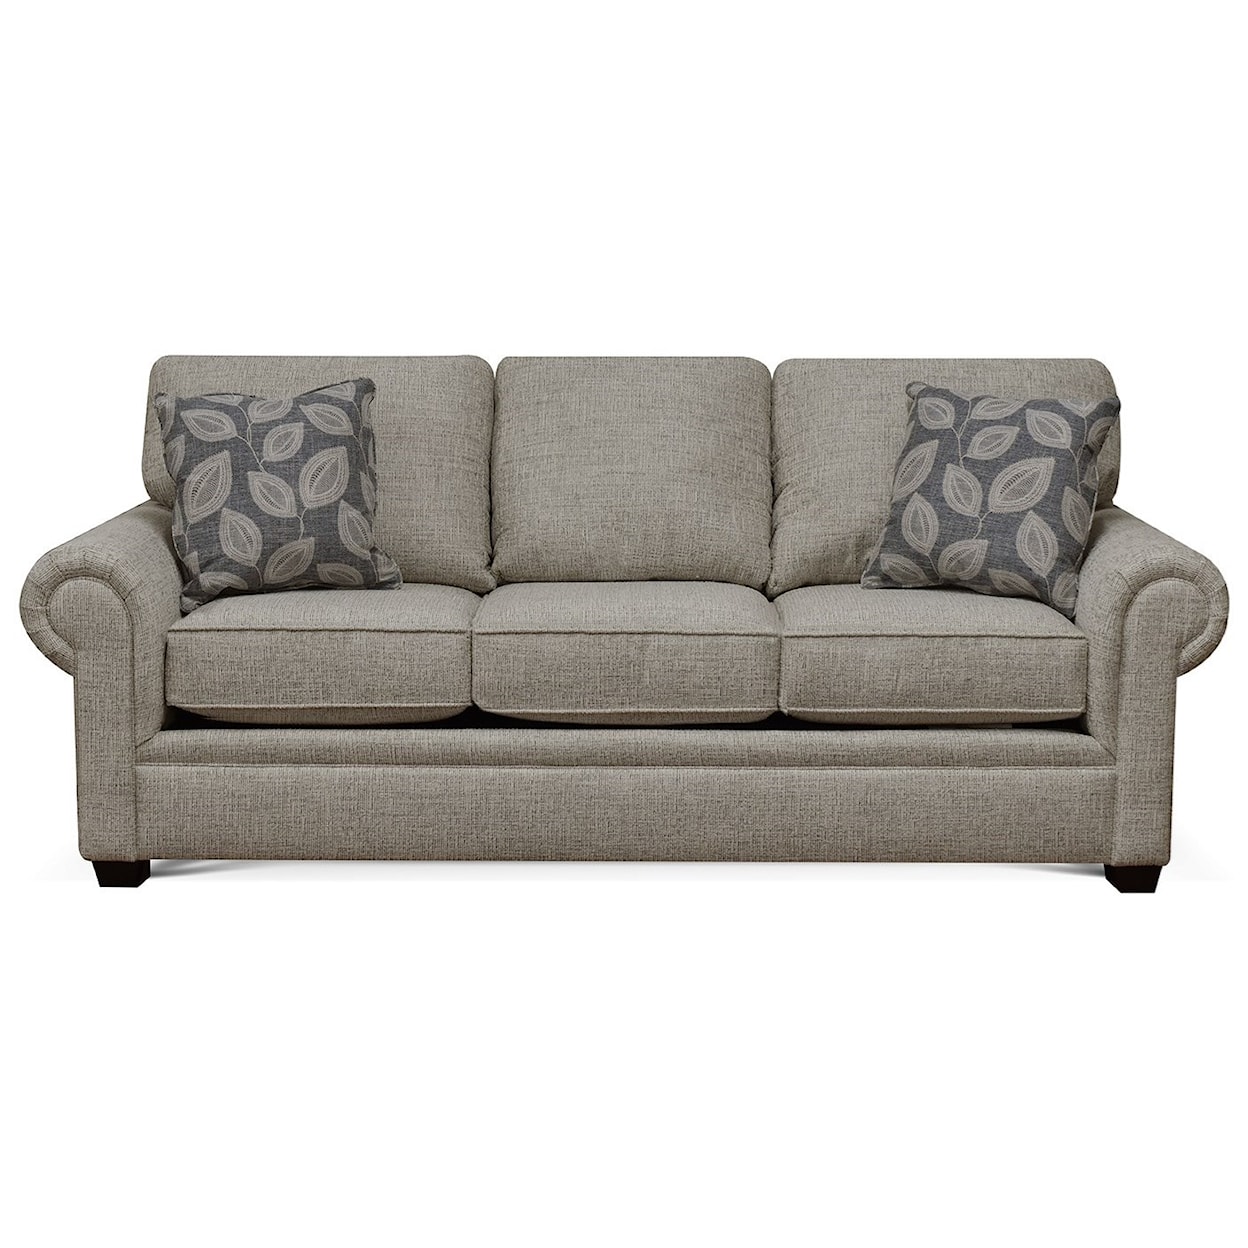 England 2250/N Series 2255 8429 Rolled Arm Sofa with Exposed Block Legs ...